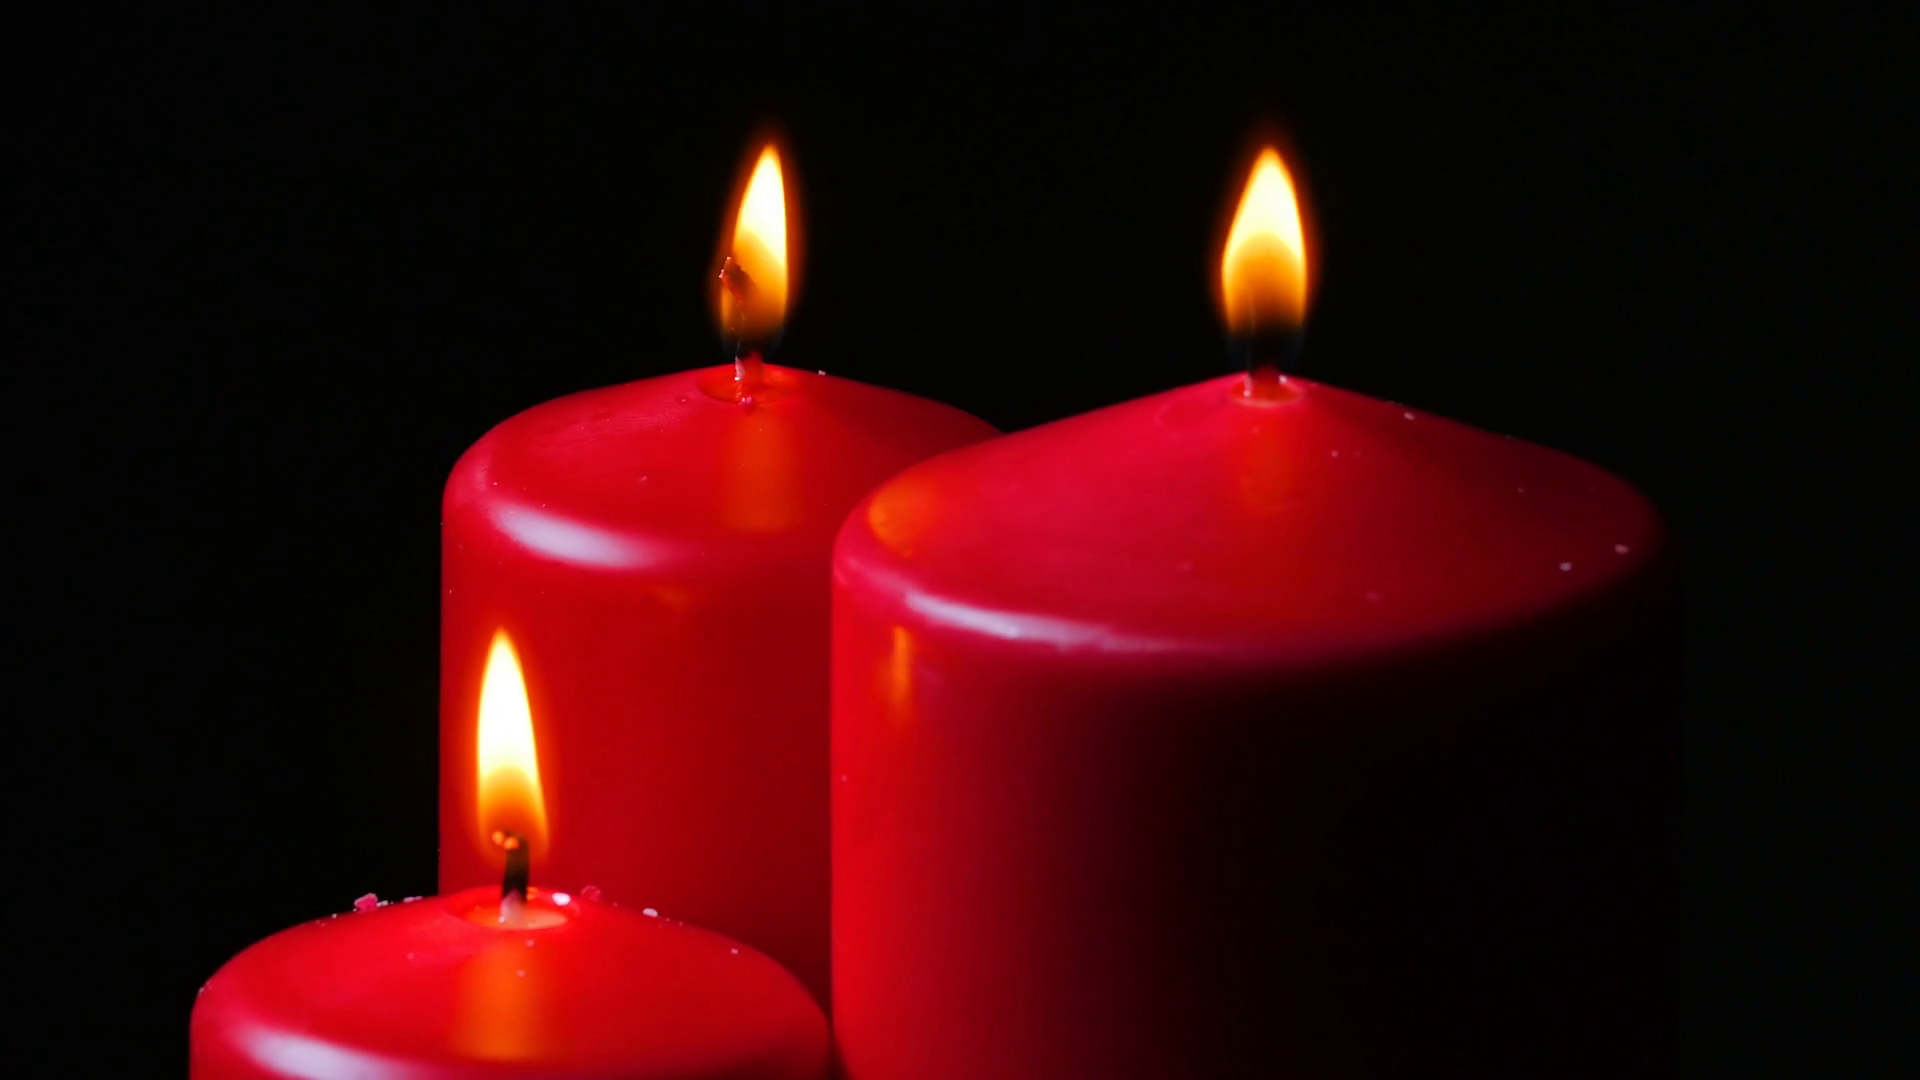 Macro Close Up 3 Lit Red Candles Rotating Around Black Background 2 ...